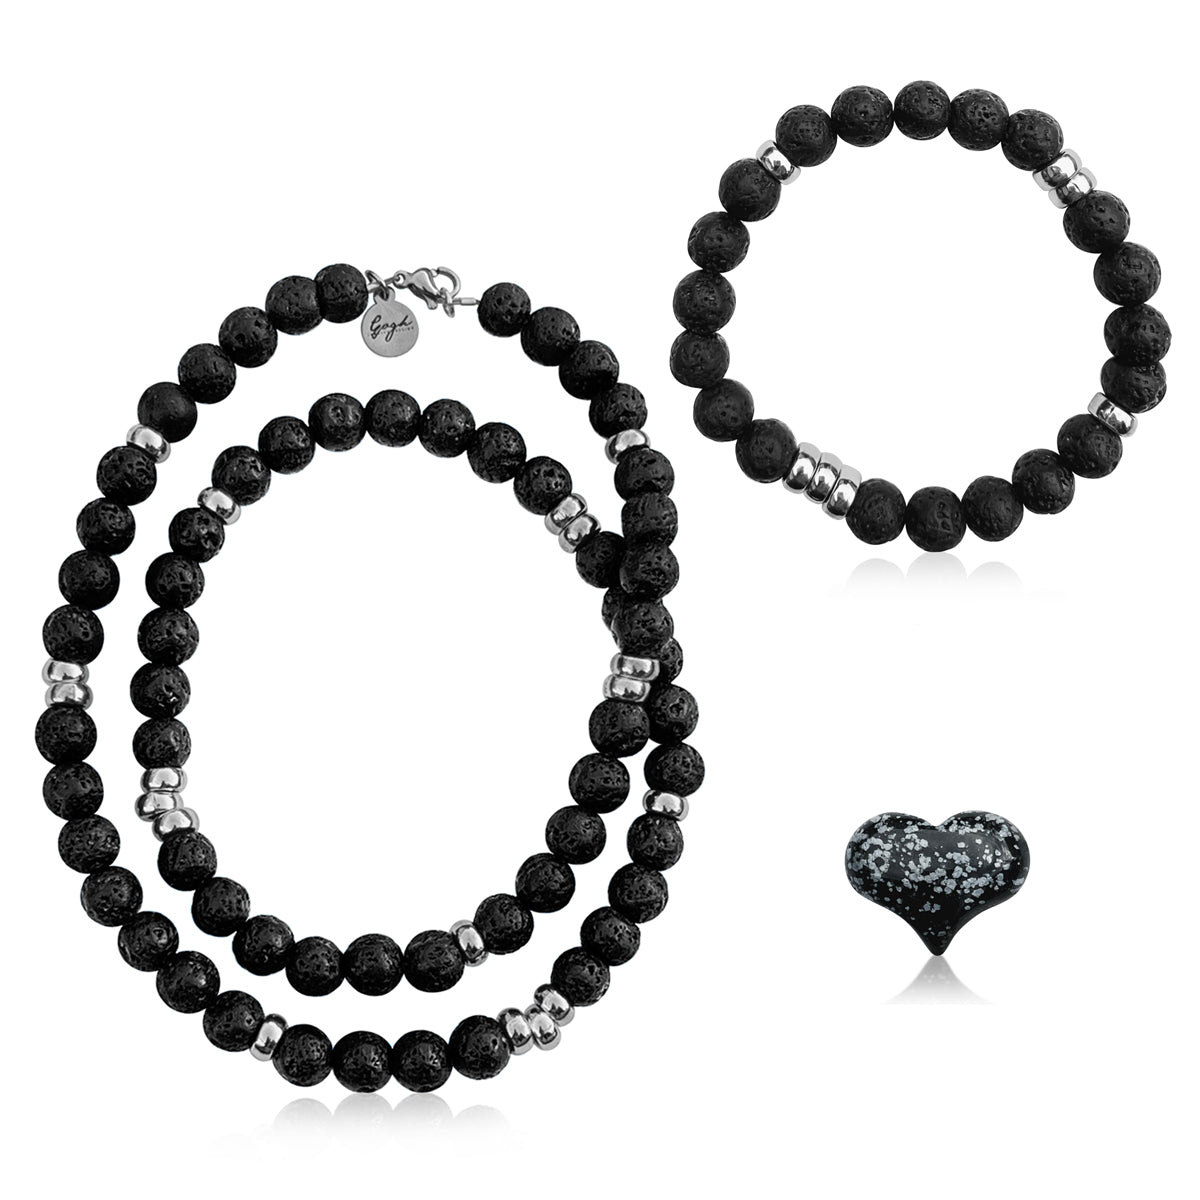 The "Grounded Healing Lava Stone Necklace and Bracelet" is more than just an accessory; it's a wearable source of tranquility and renewal.